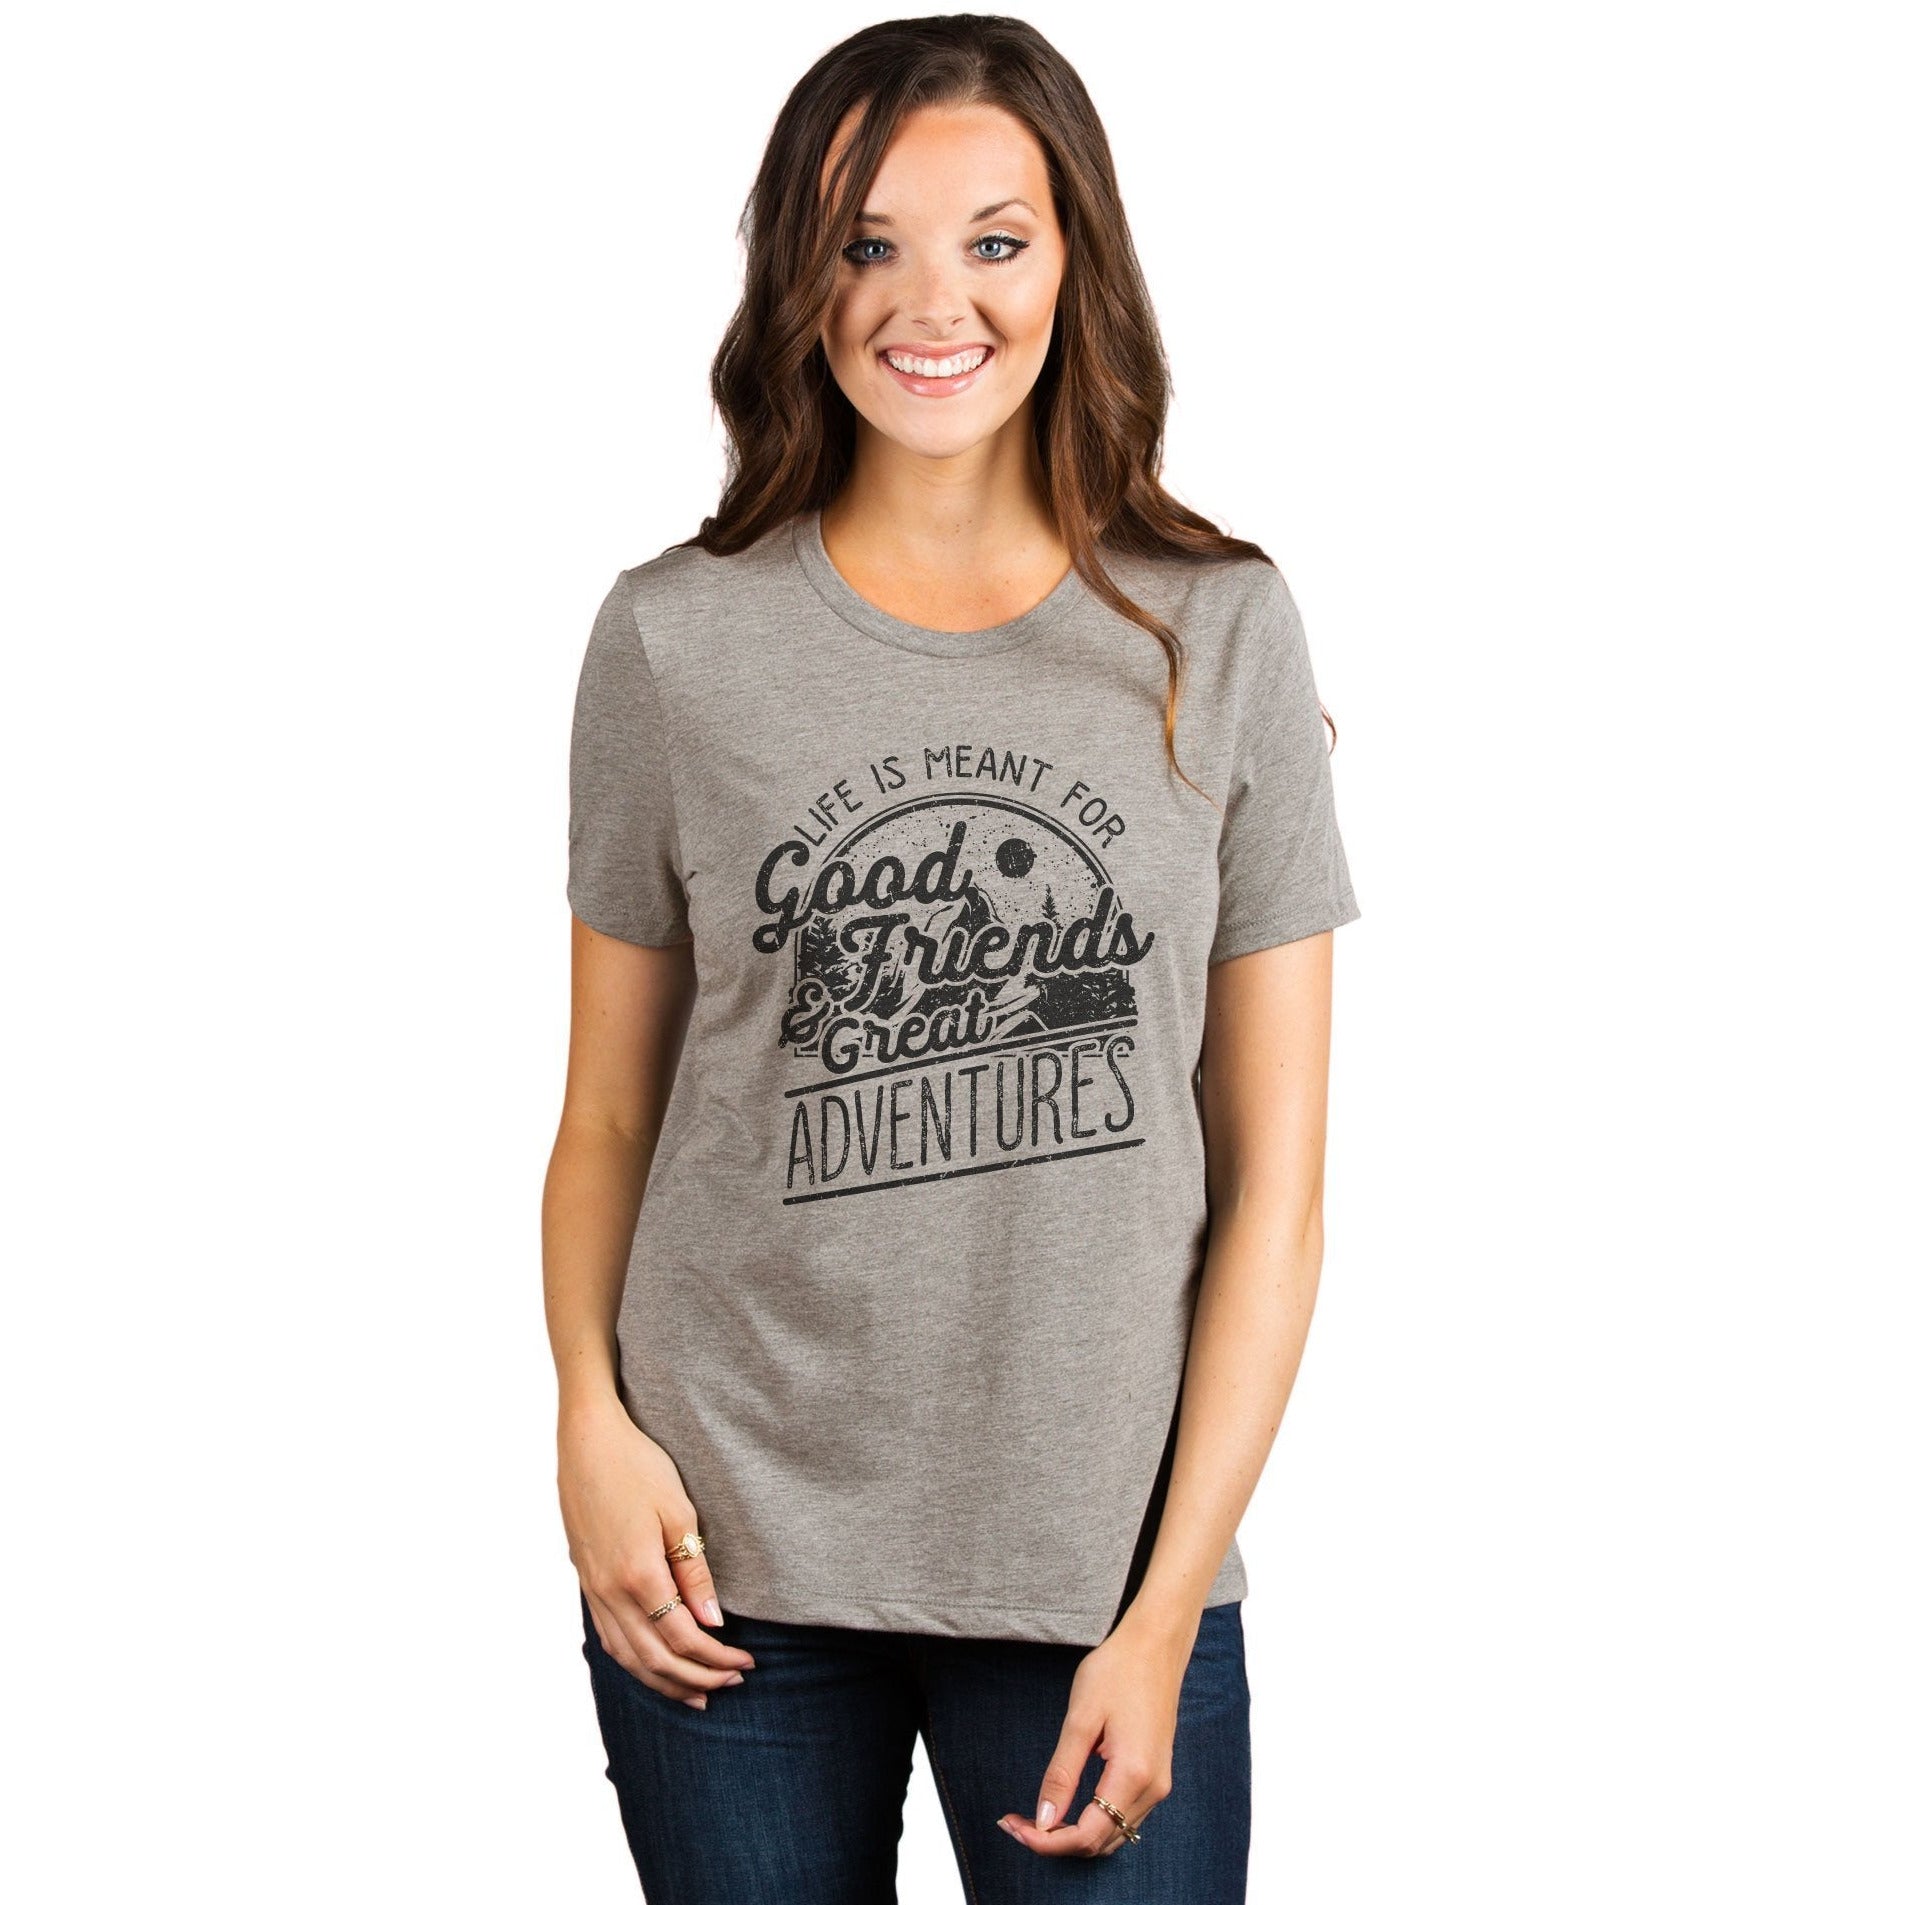 Good Friends And Great Adventures Women's Relaxed Crewneck T-Shirt Top Tee Heather Tan Model
